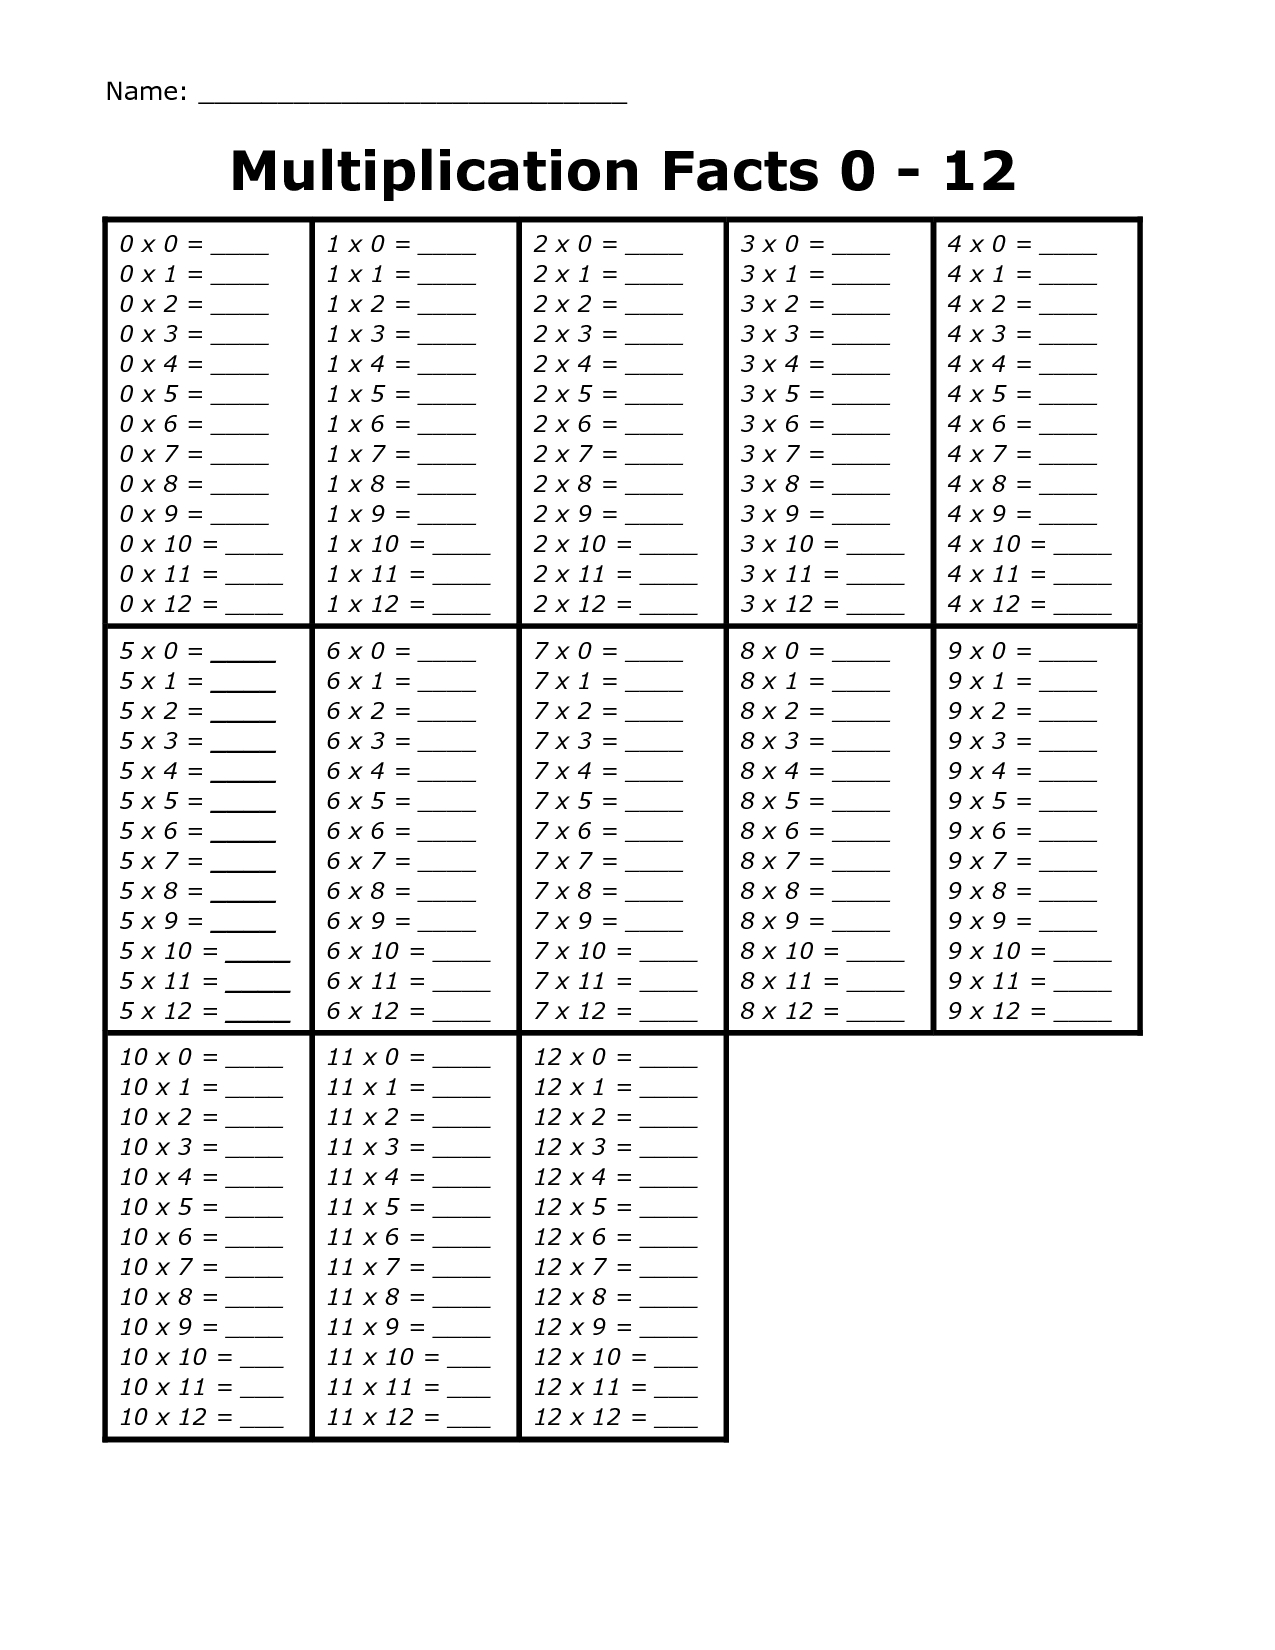 Printable Multiplication Facts 0 12 | Multiplication Facts intended for Printable Multiplication Table 0-12